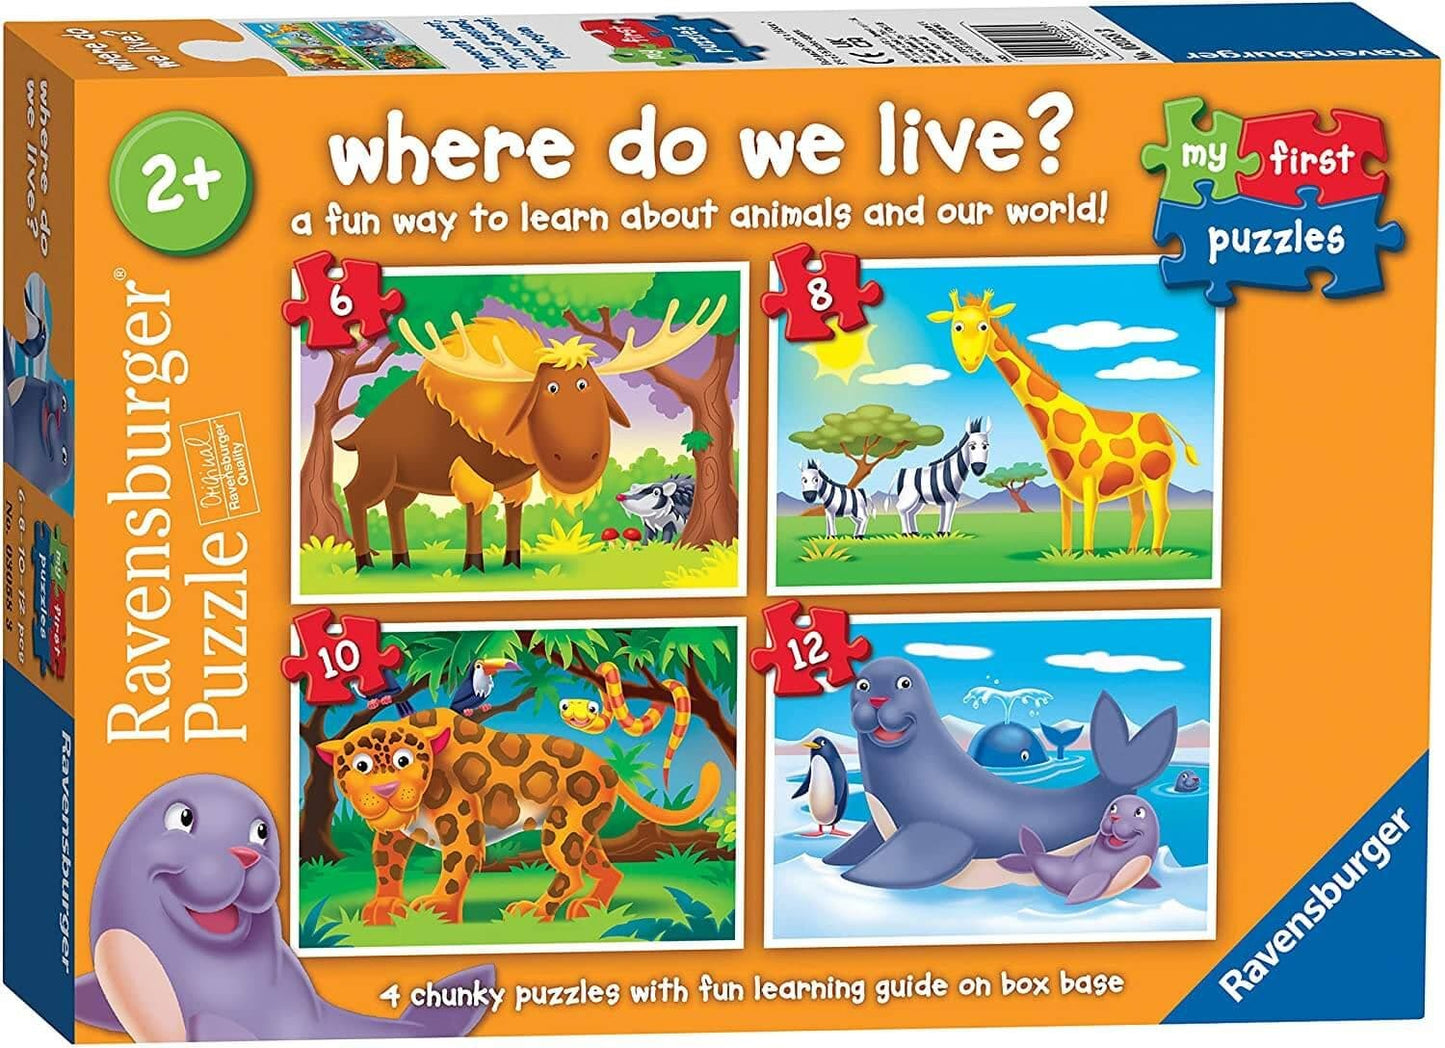 Ravensburger - My First Puzzle - Where Do we Live? Jigsaw Puzzle